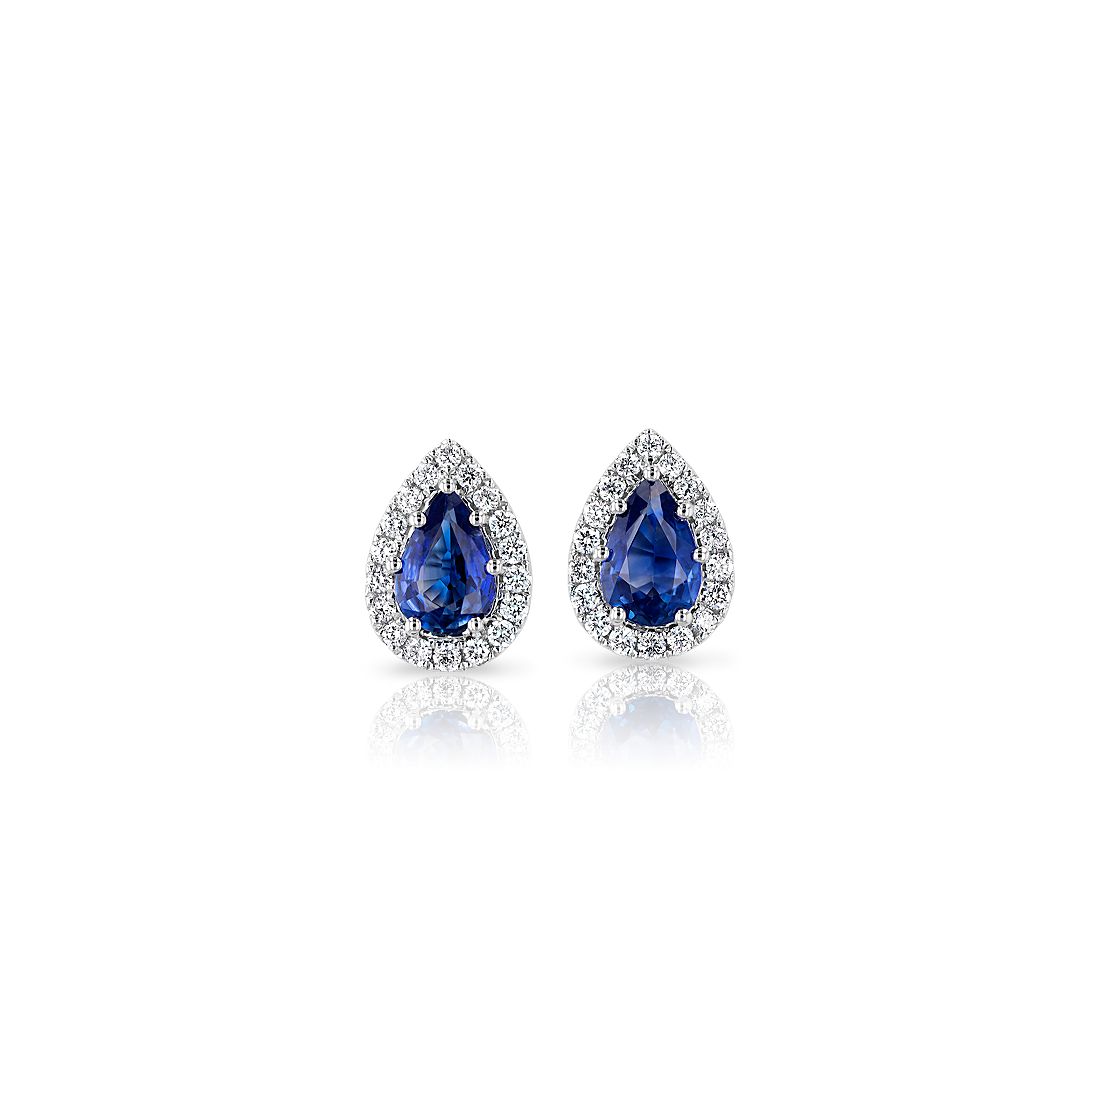 Pear-Shaped Sapphire Stud Earrings with Diamond Halo in 14k White Gold (6x4mm)